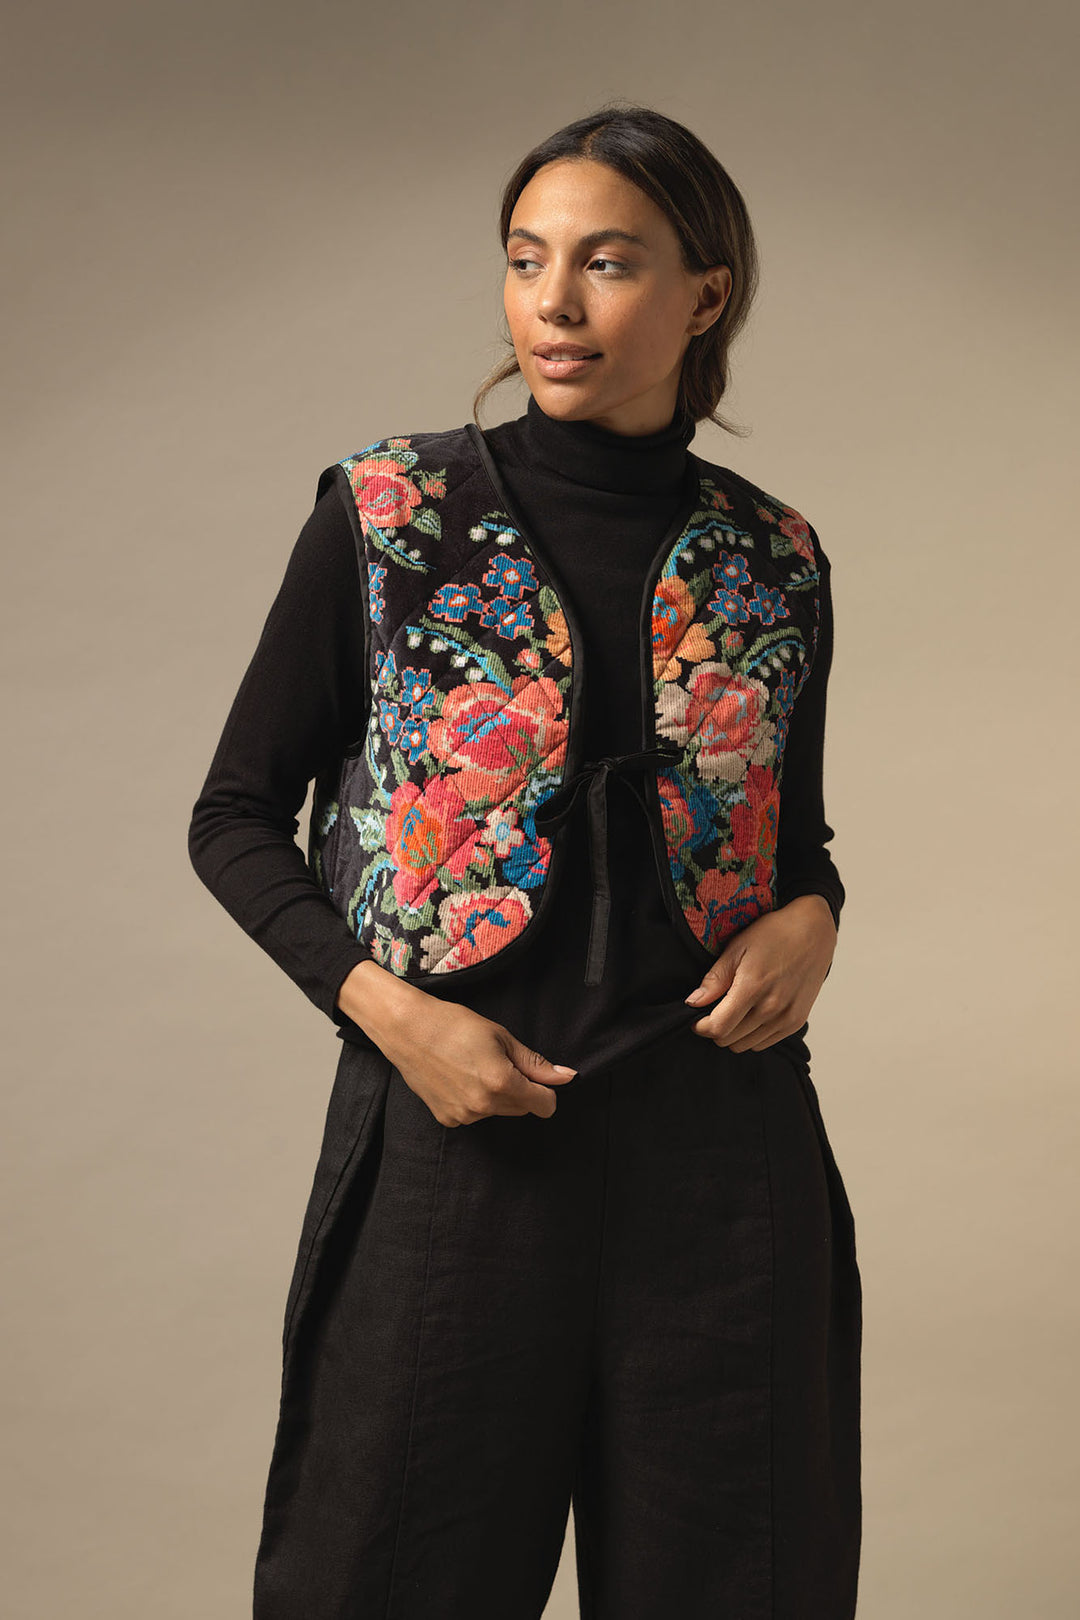 ladies velvet short gilet party in woven flower print featuring colourful flowers on a black background by One Hundred Stars